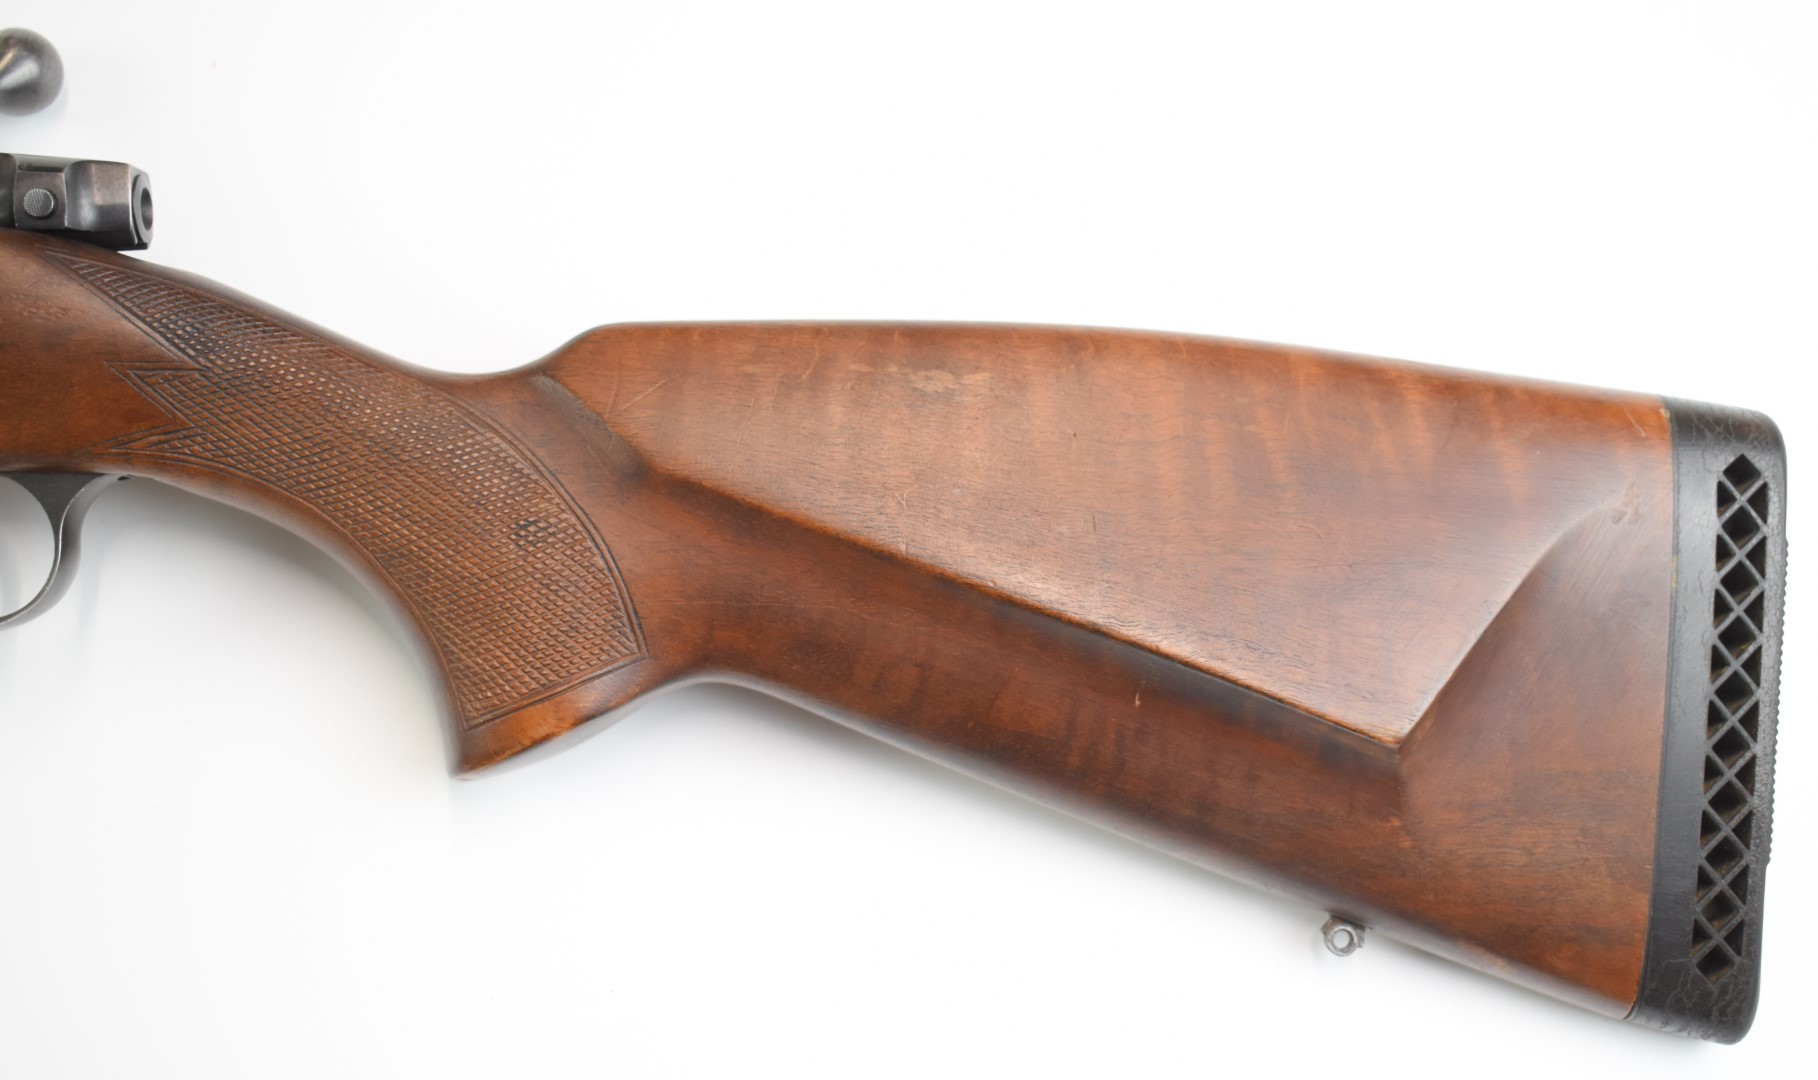 BRNO CZ 537 .243 bolt-action rifle with chequered semi-pistol grip and forend, raised cheek-piece, - Image 13 of 20